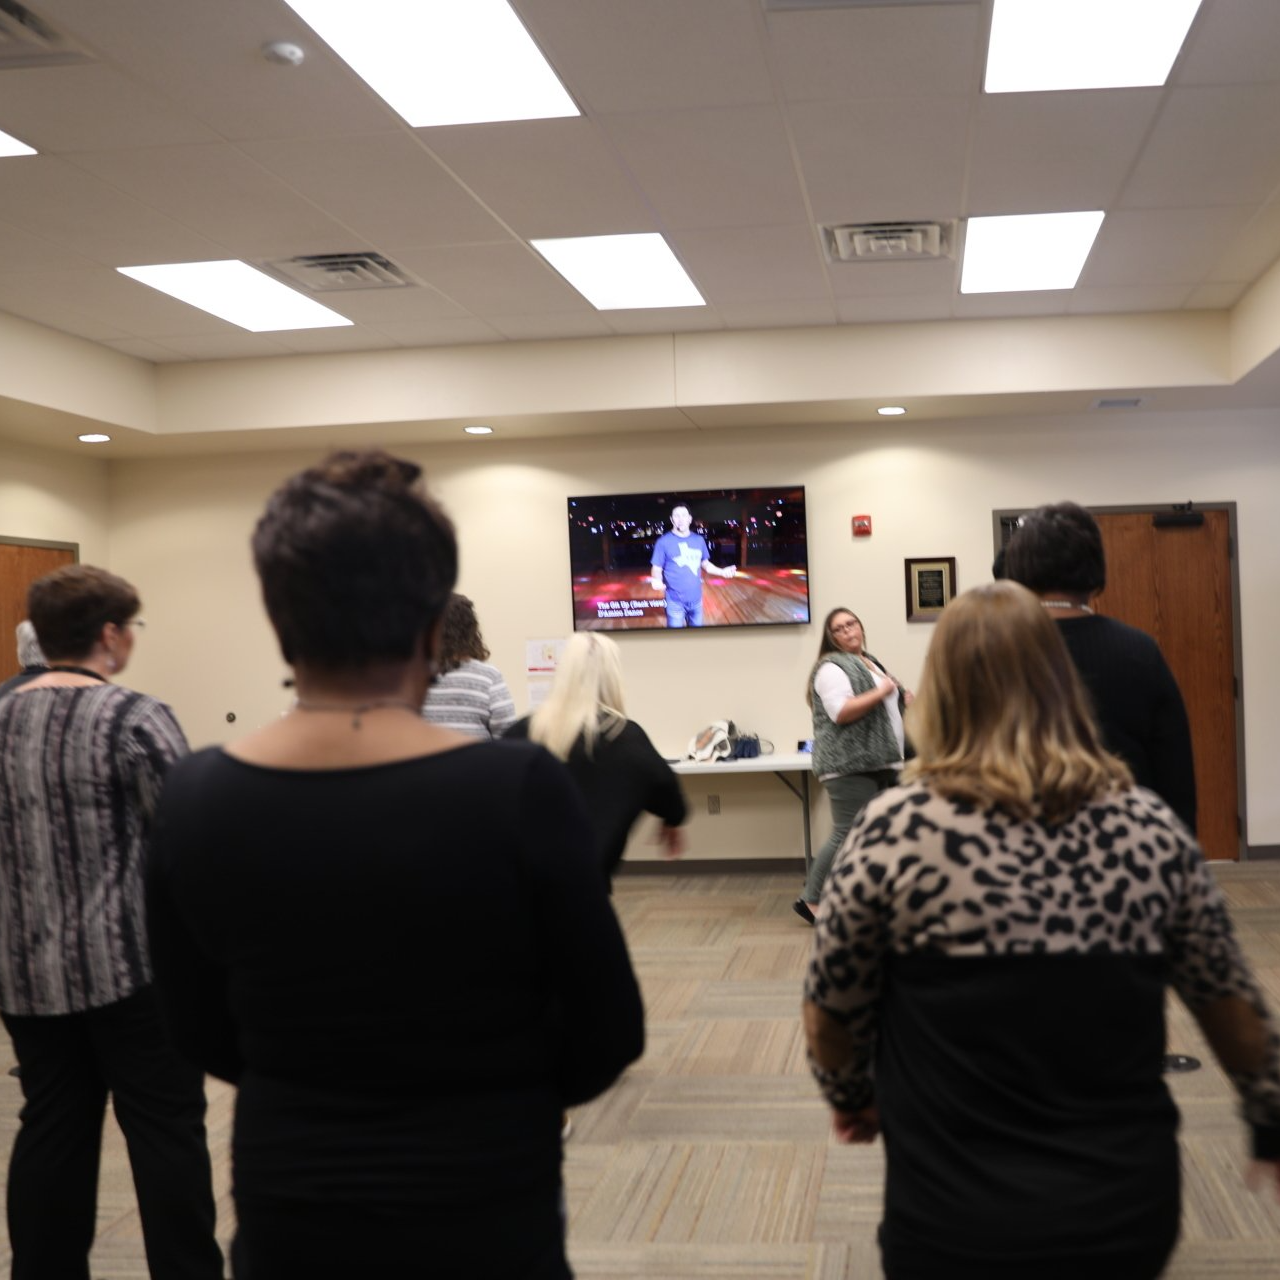 A group of people are standing in a room watching a tv